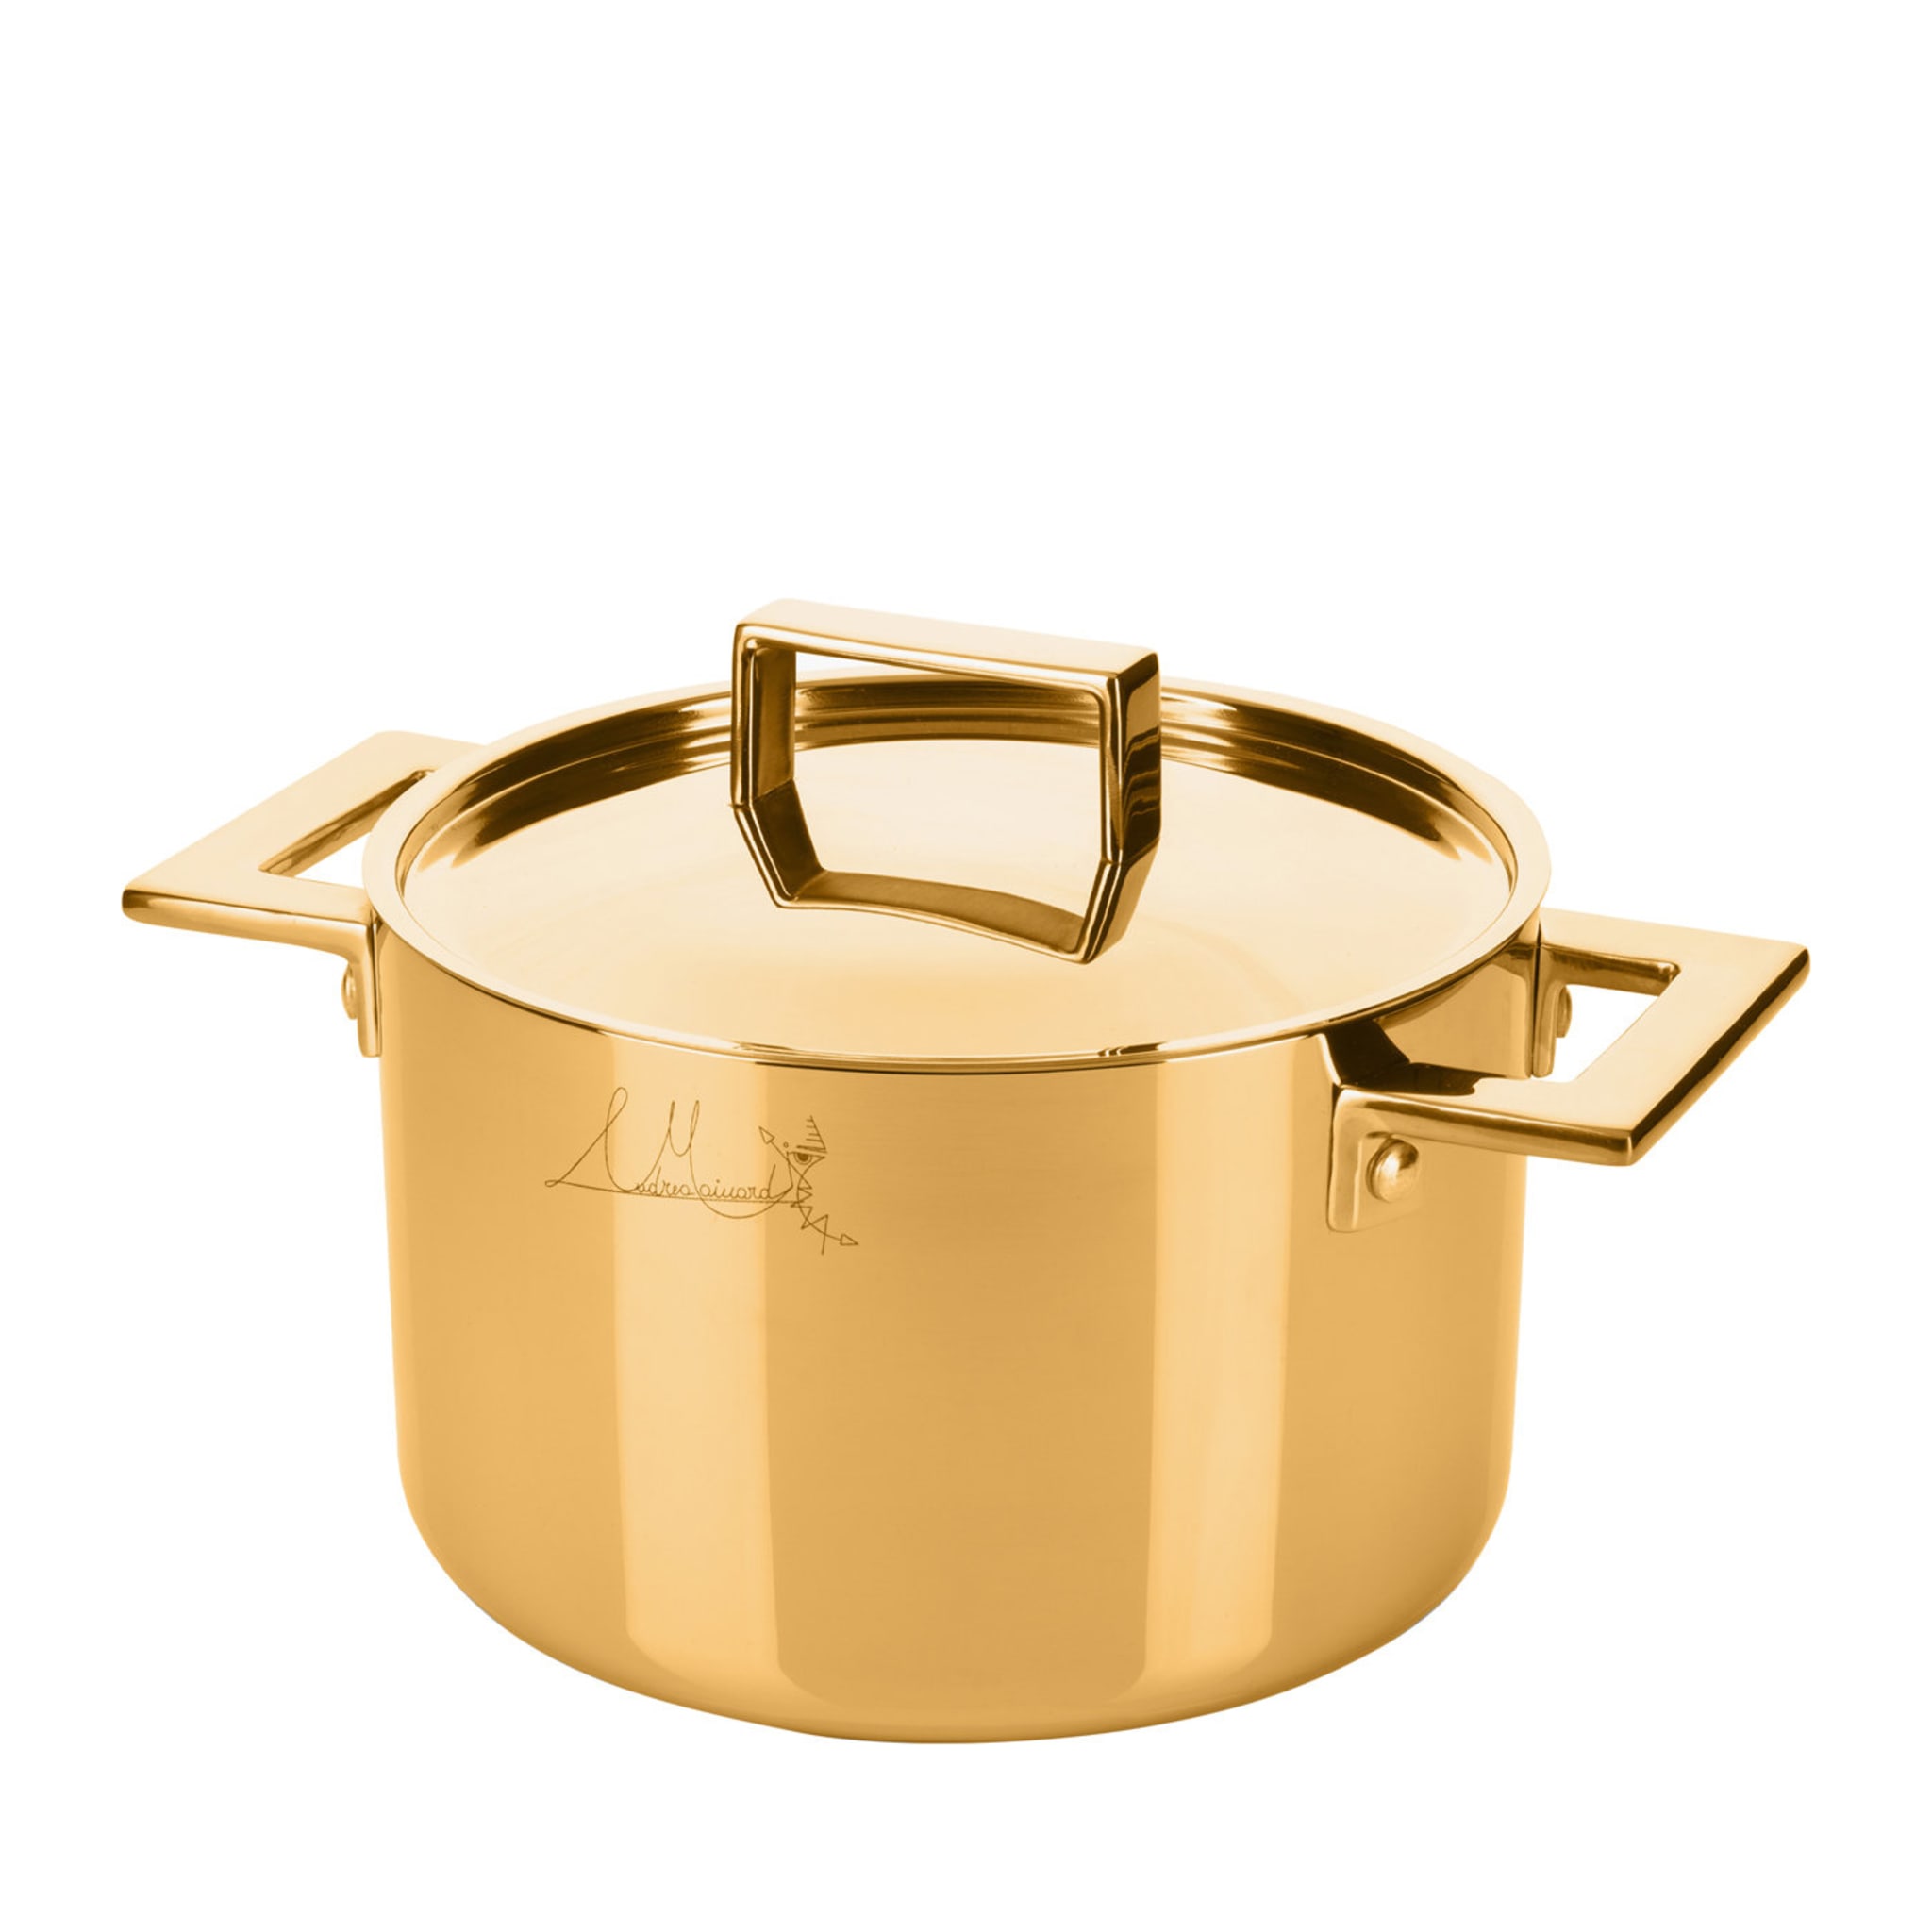 Attiva Gold 24 cm Pot with Lid - Main view